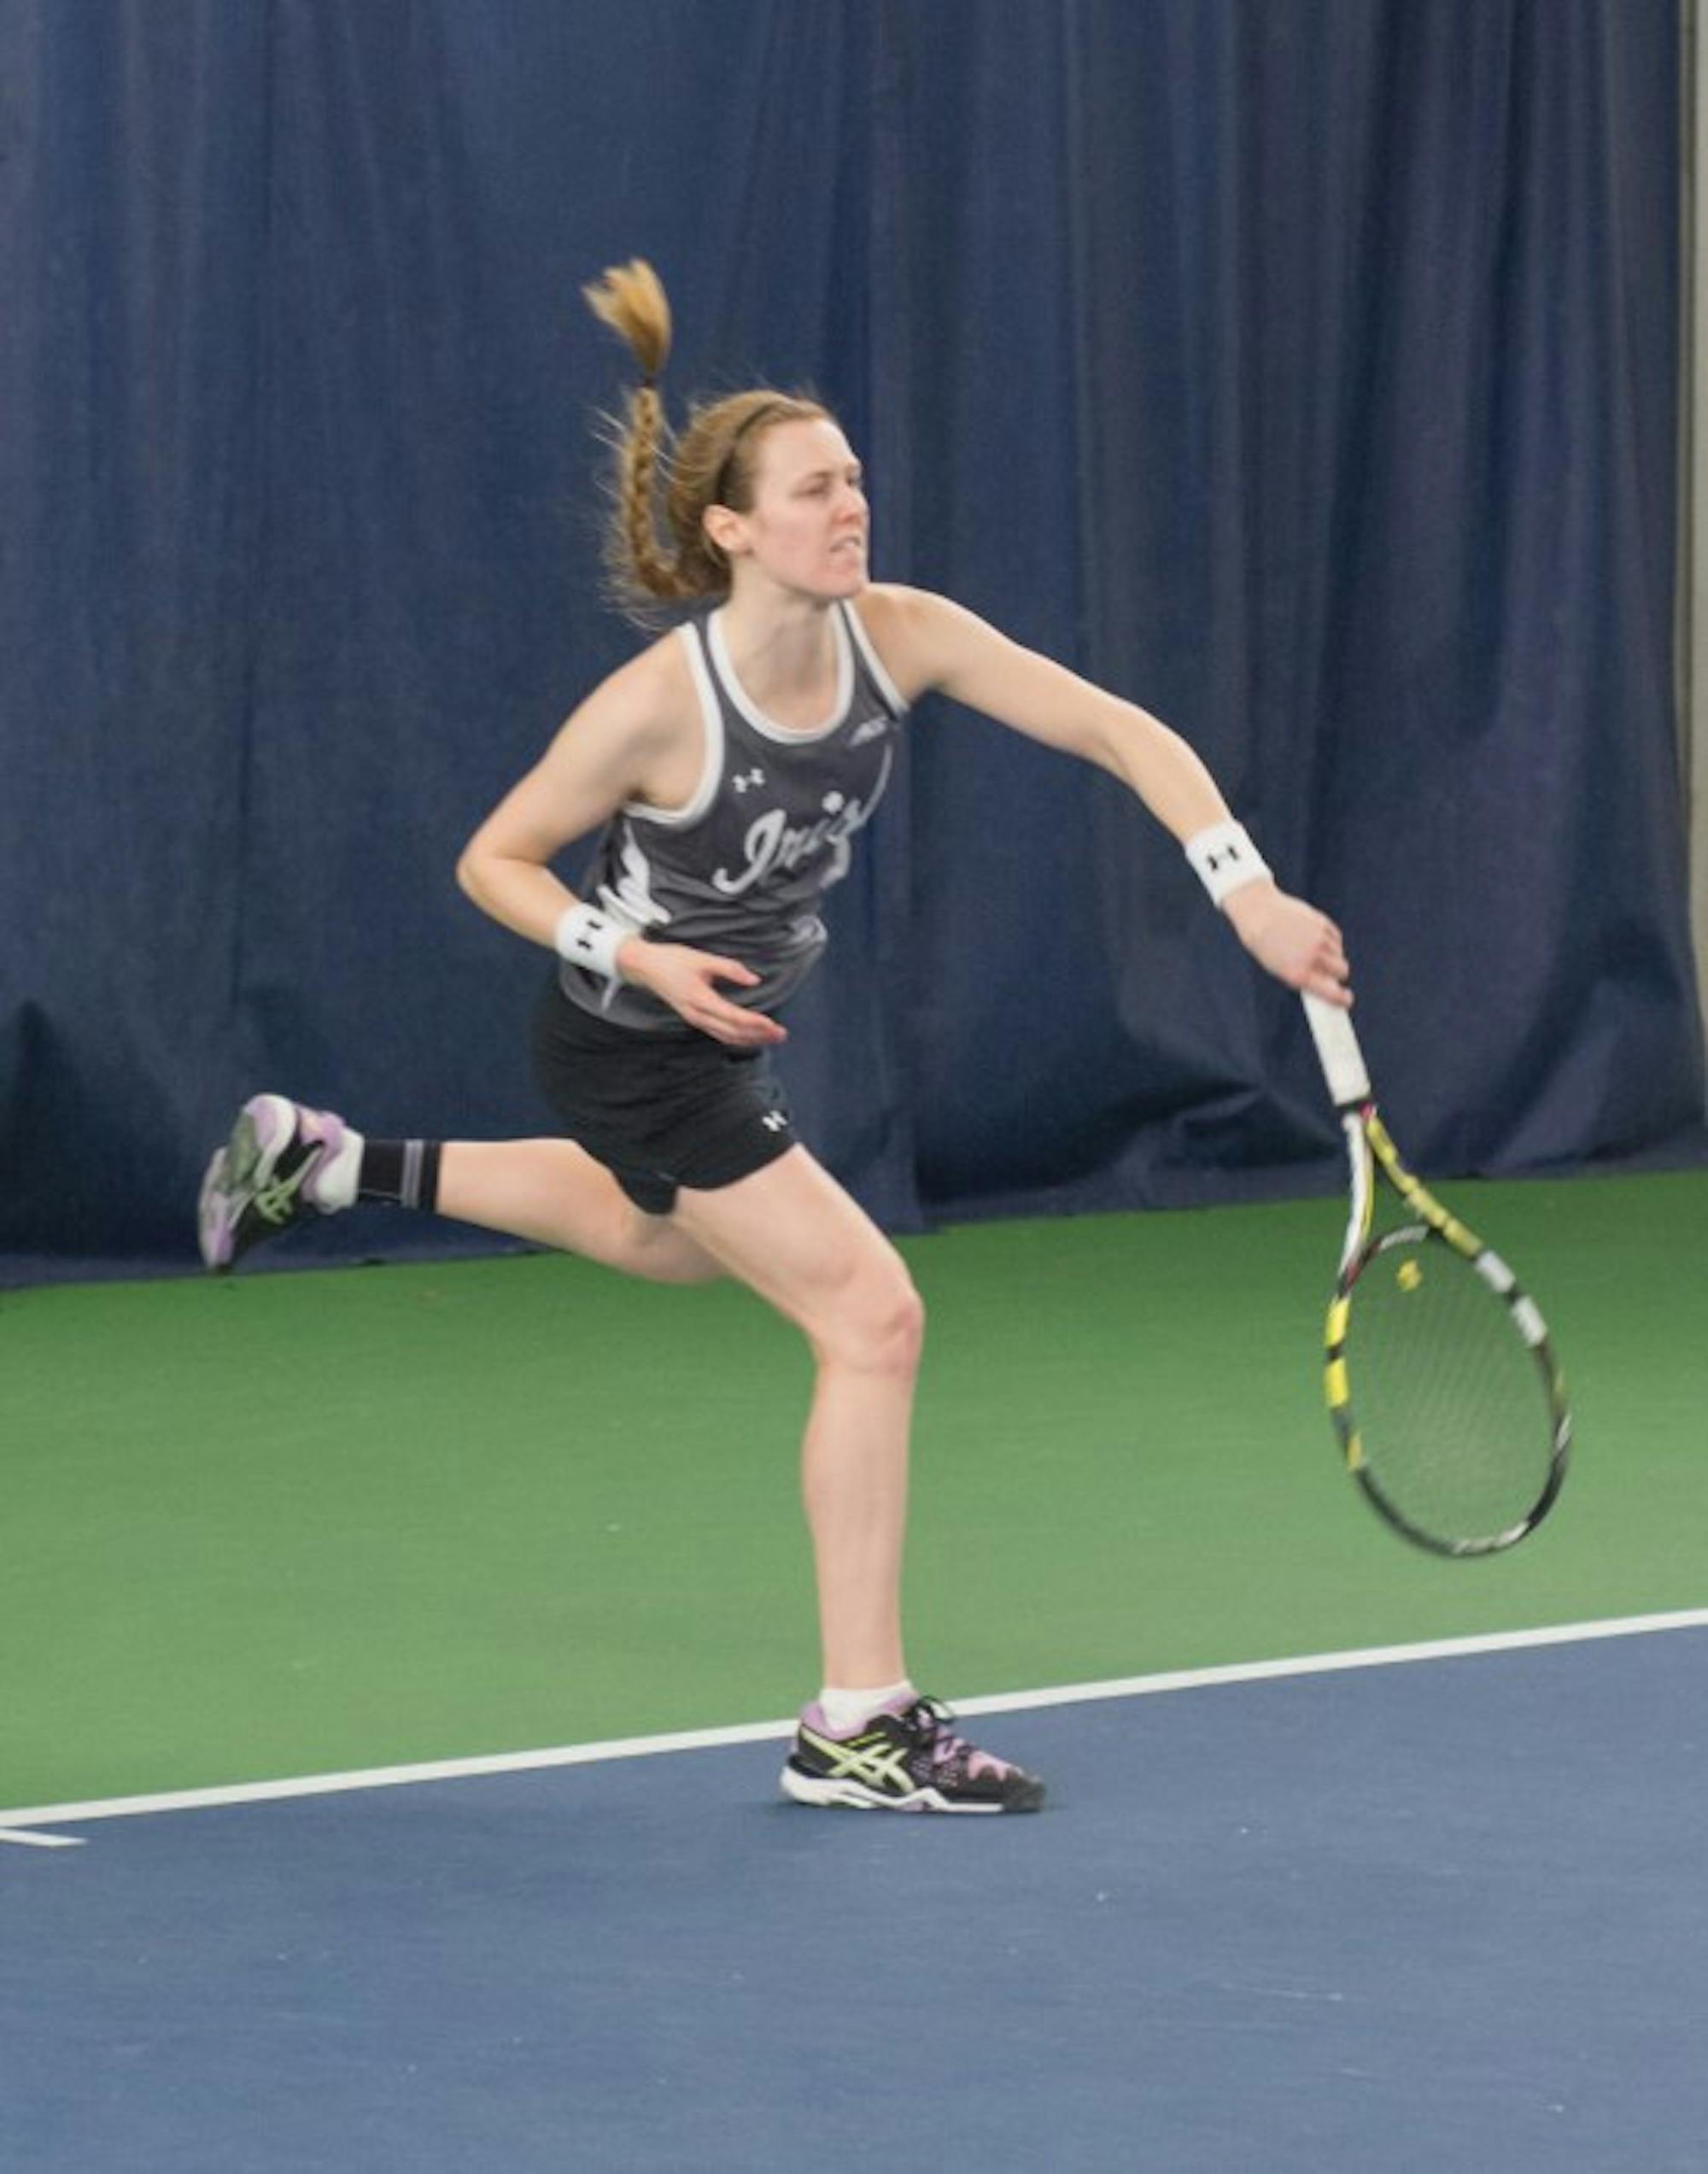 Irish sophomore Brooke Broda returns the ball during Notre Dame's 6-1 win over Indiana at Eck Tennis Pavilion on Feb. 20.